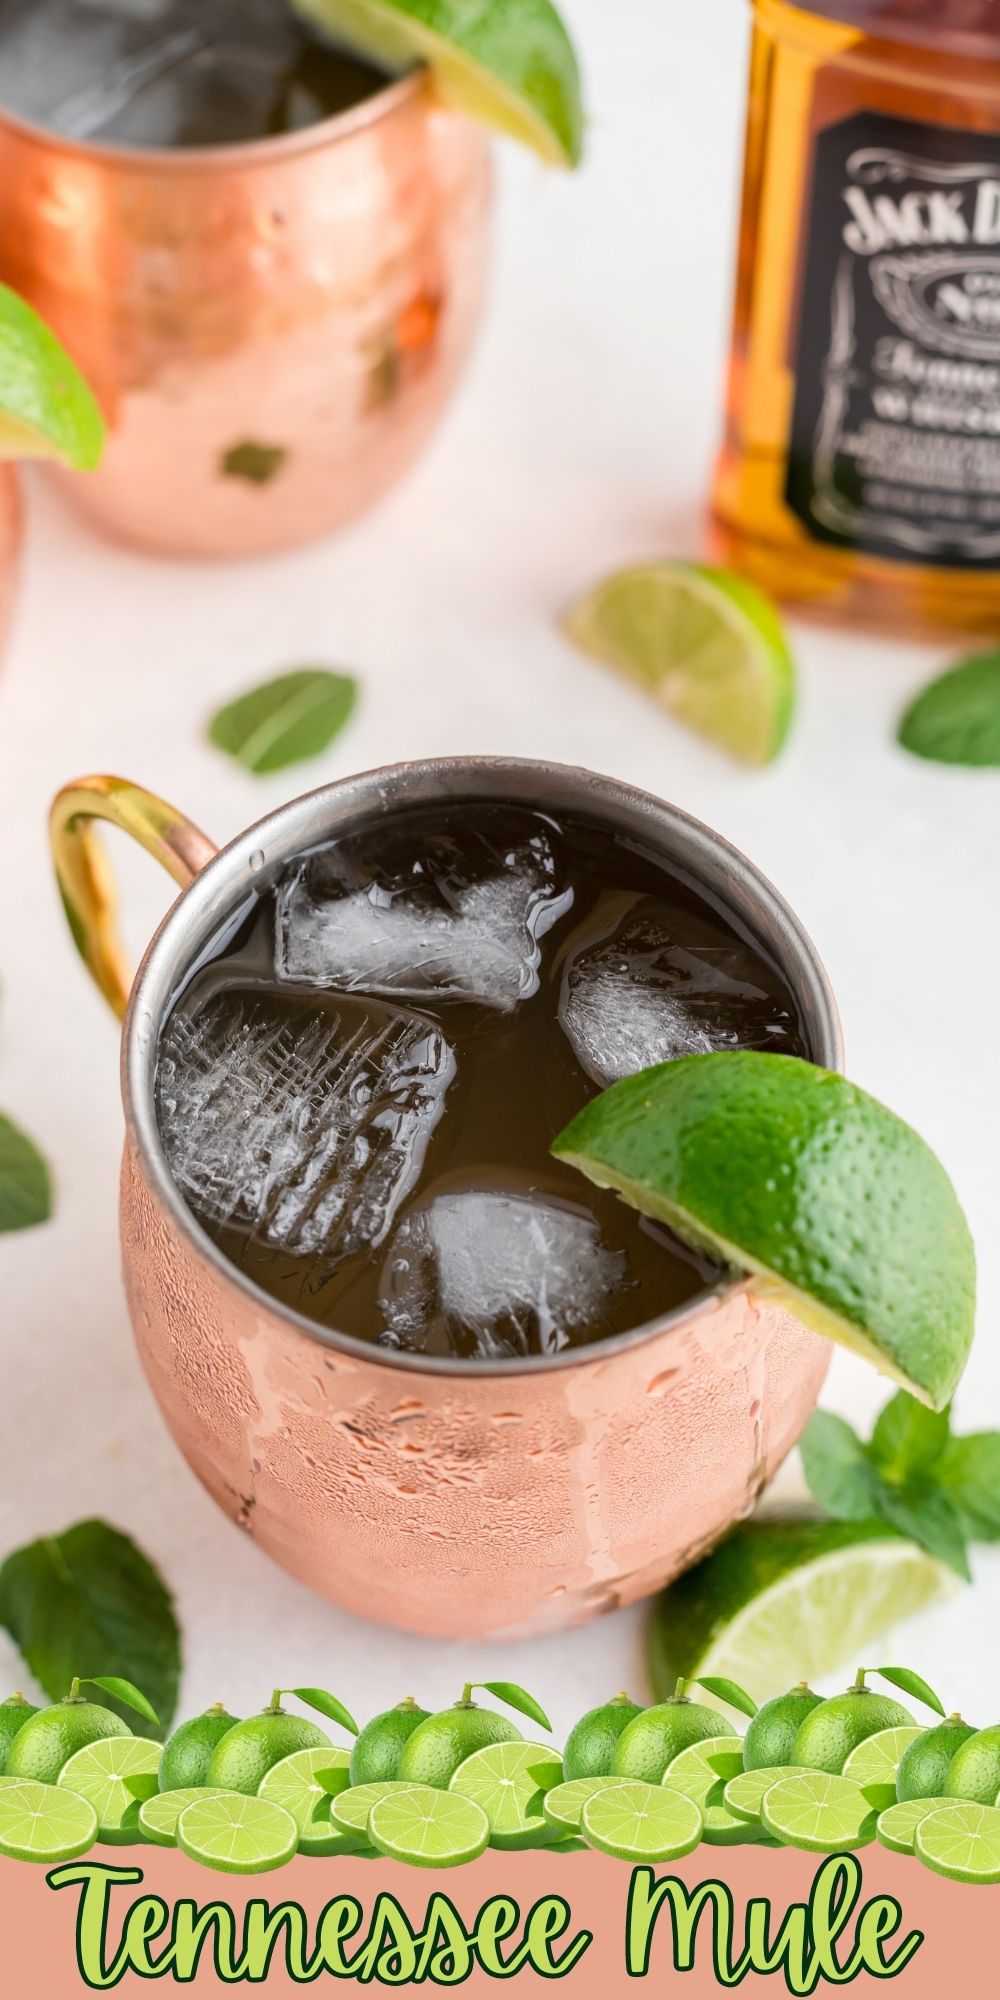 This Tennessee Mule Recipe is a delicious twist on a classic mule cocktail. This easy whiskey recipe has a refreshing, one of a kind flavor.